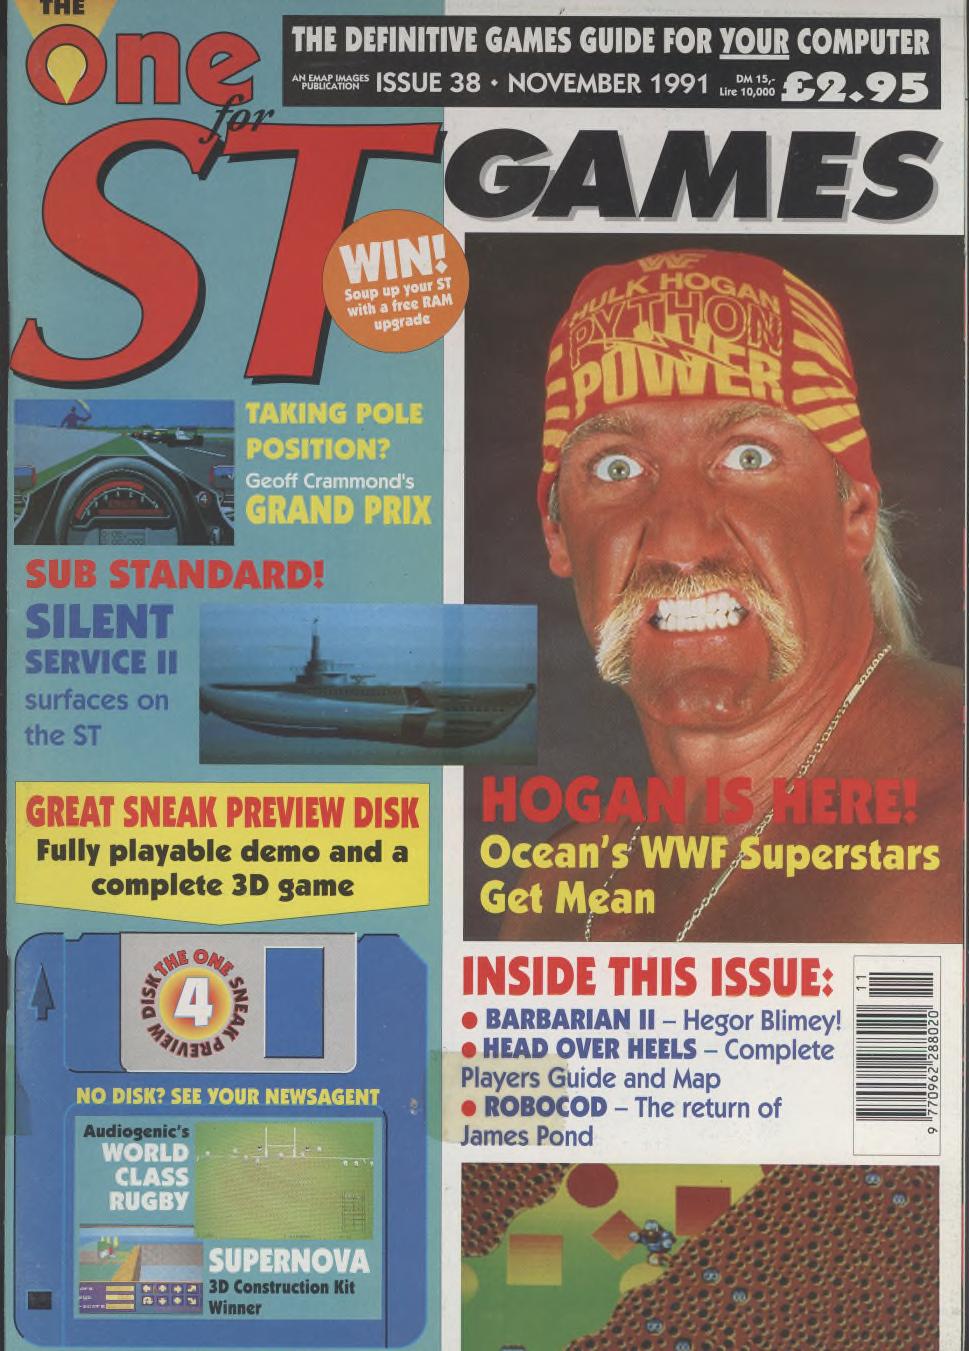 Cover for The One 38 (Nov 1991)